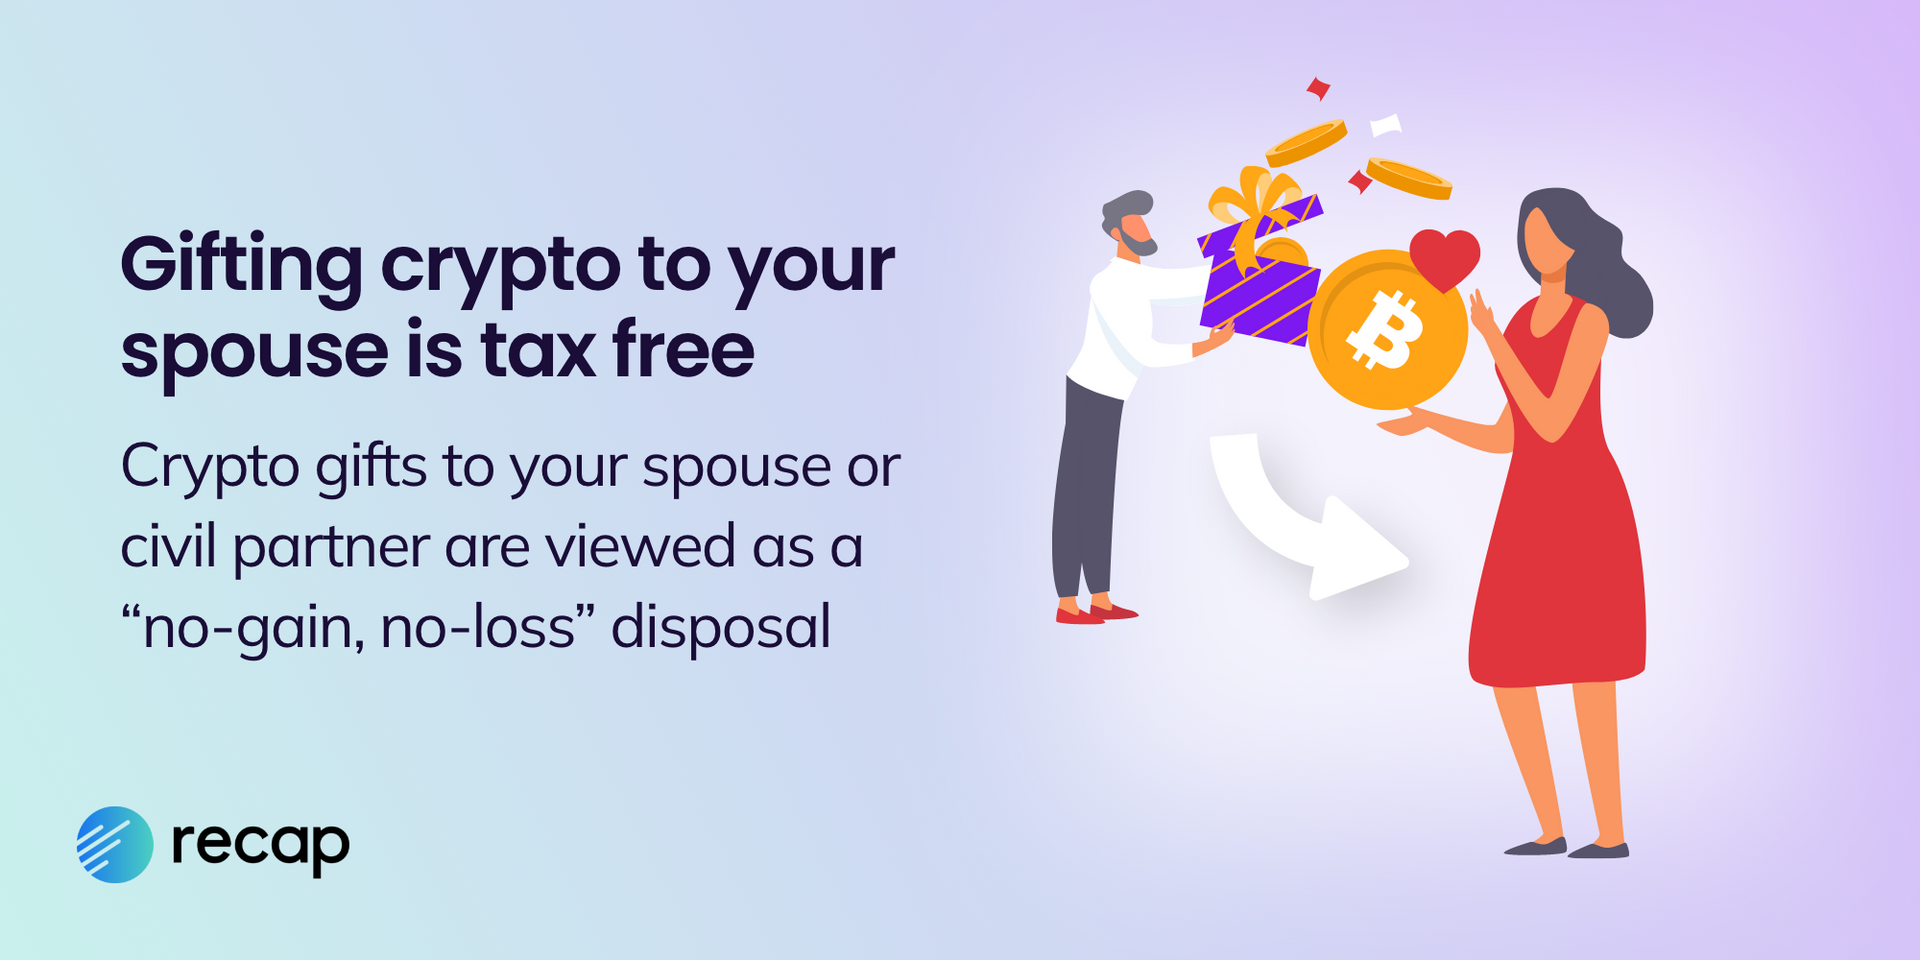 Infographic stating that gifting crypto to your spouse or civil partner is tax free and viewed as a "no-gain, no-loss" disposal